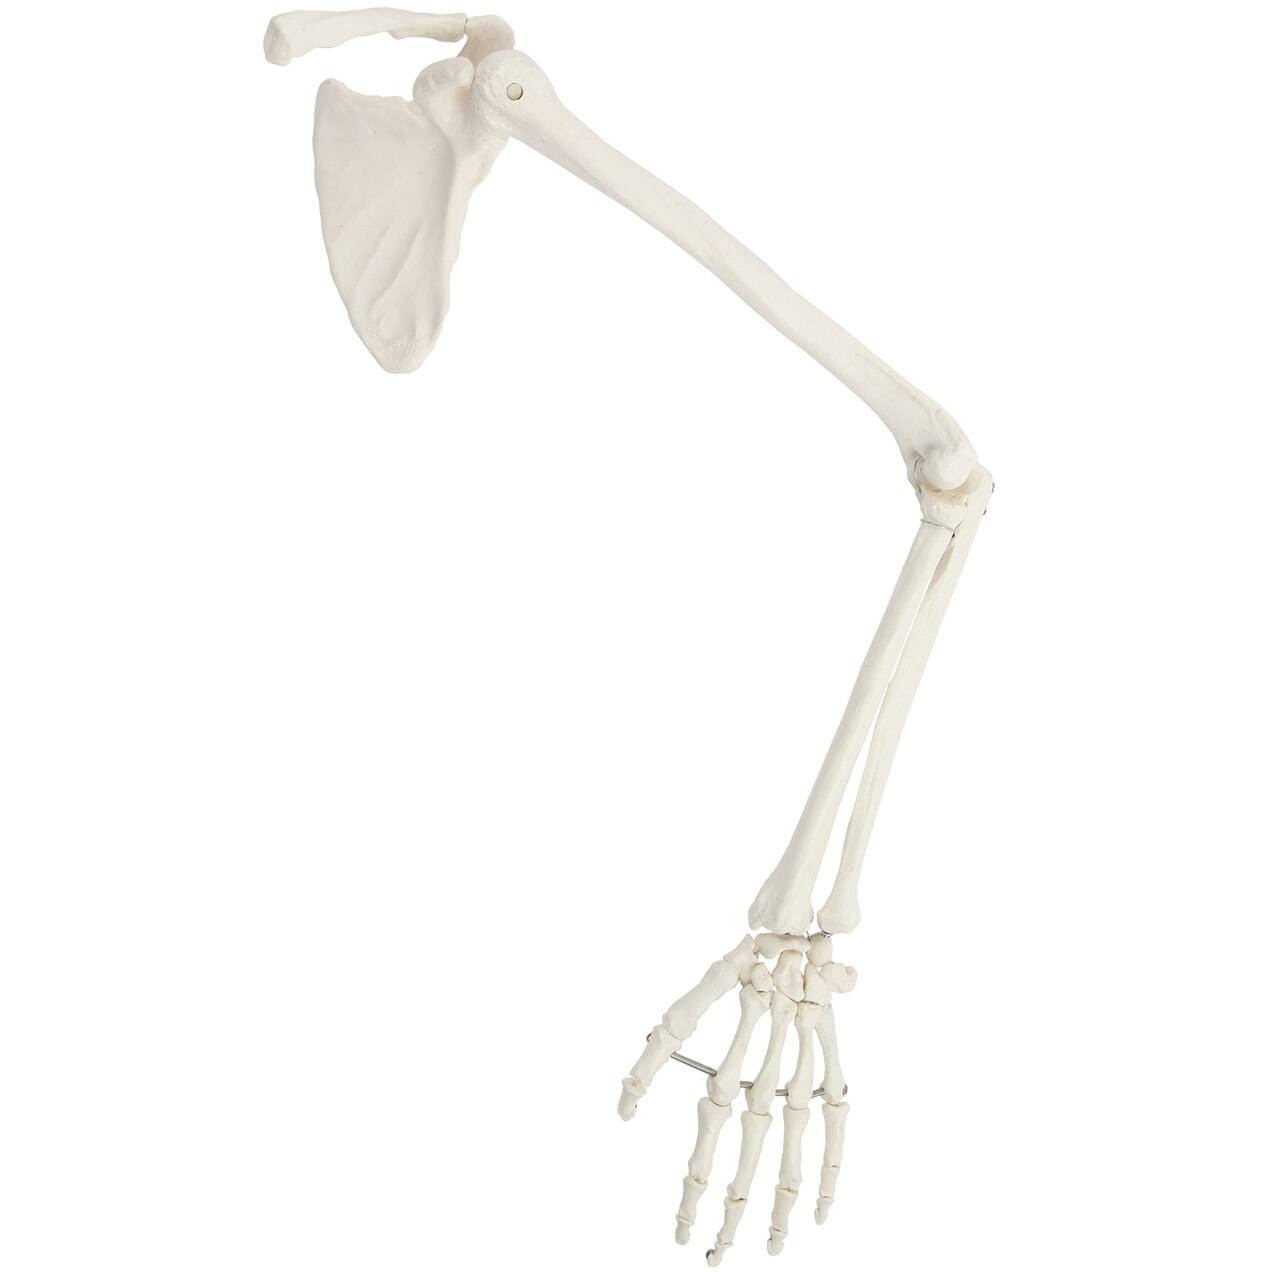 Axis Scientific Life-Size Human Arm Skeleton with Clavicle